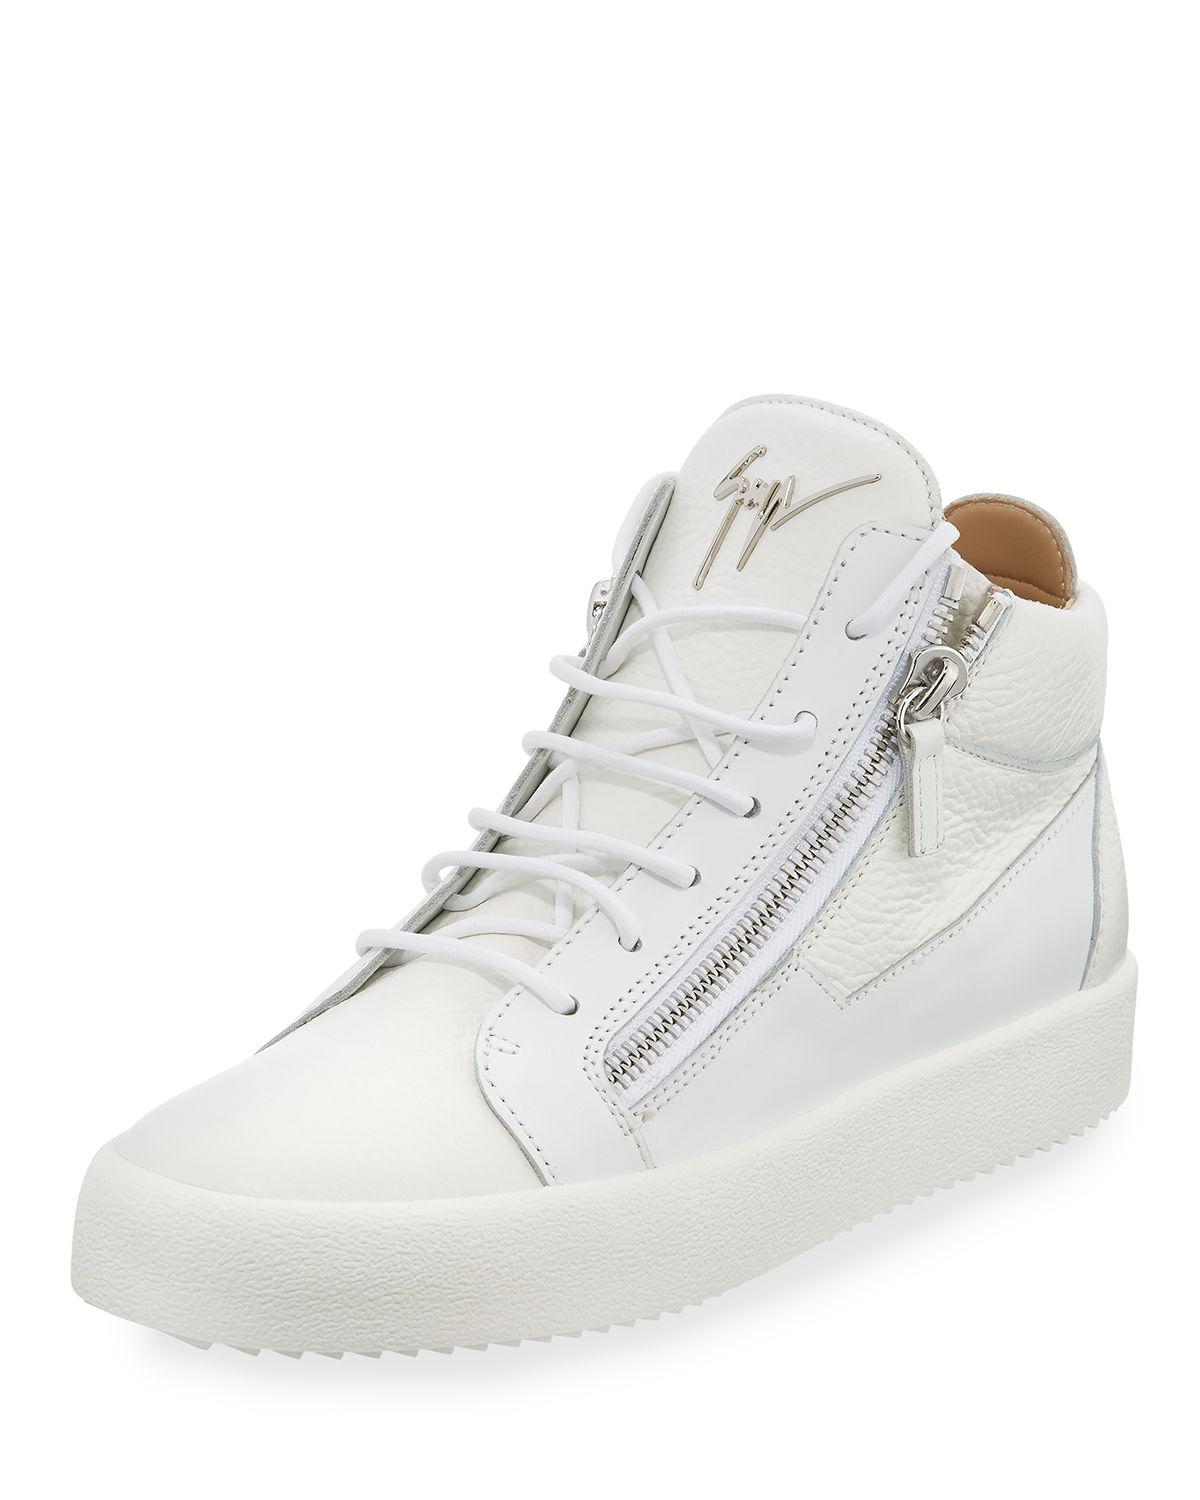 Giuseppe Zanotti Men's Textured Leather Mid-top Sneakers in White for ...